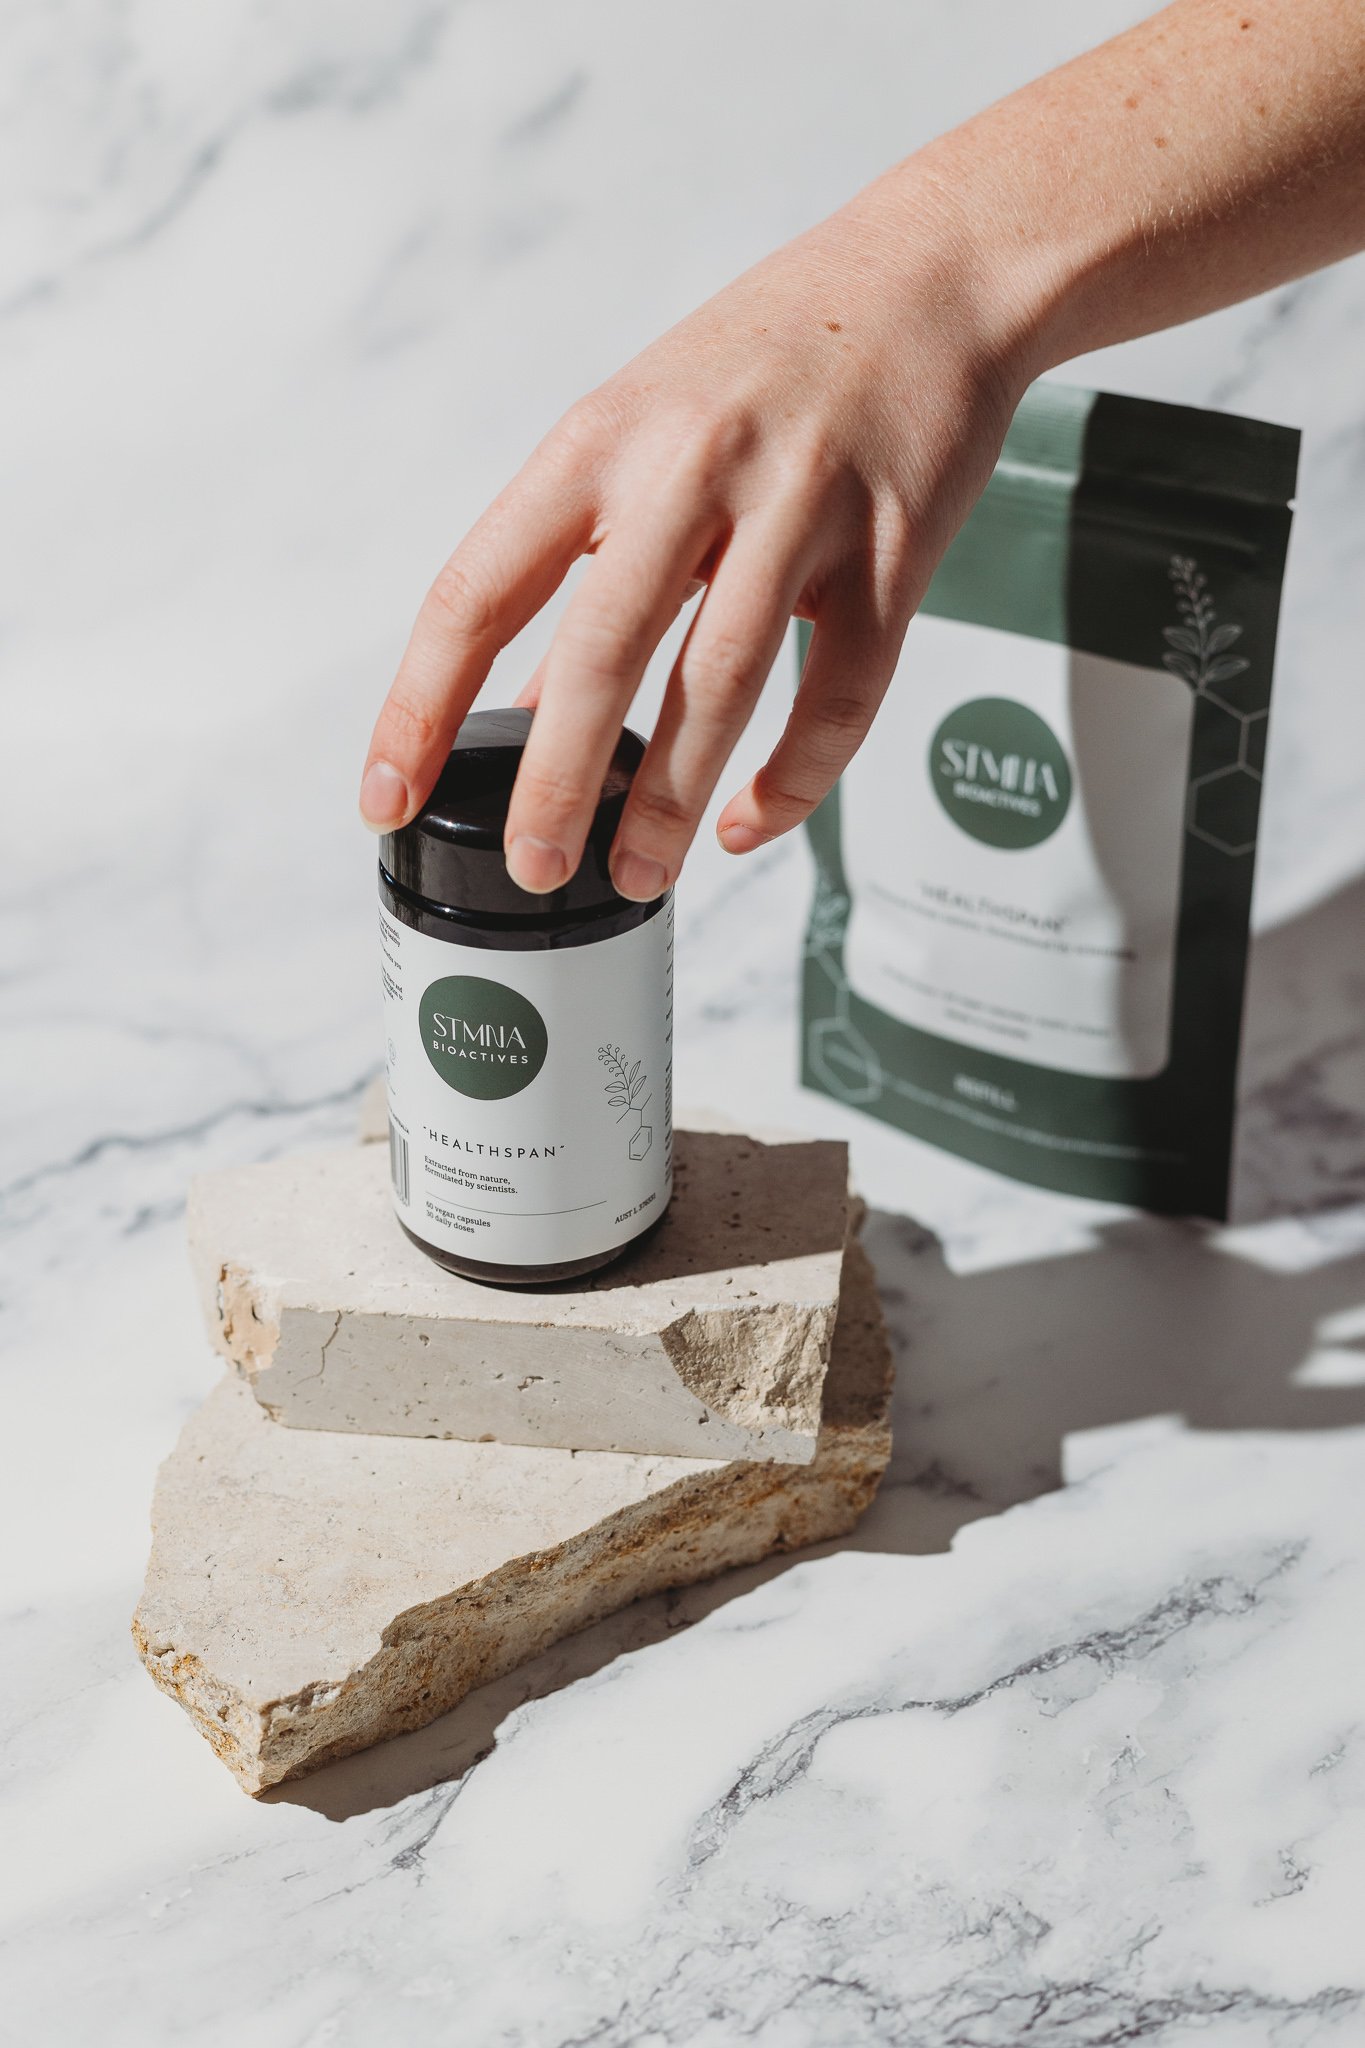 Canberra product photographer - hand reaches for vitamins